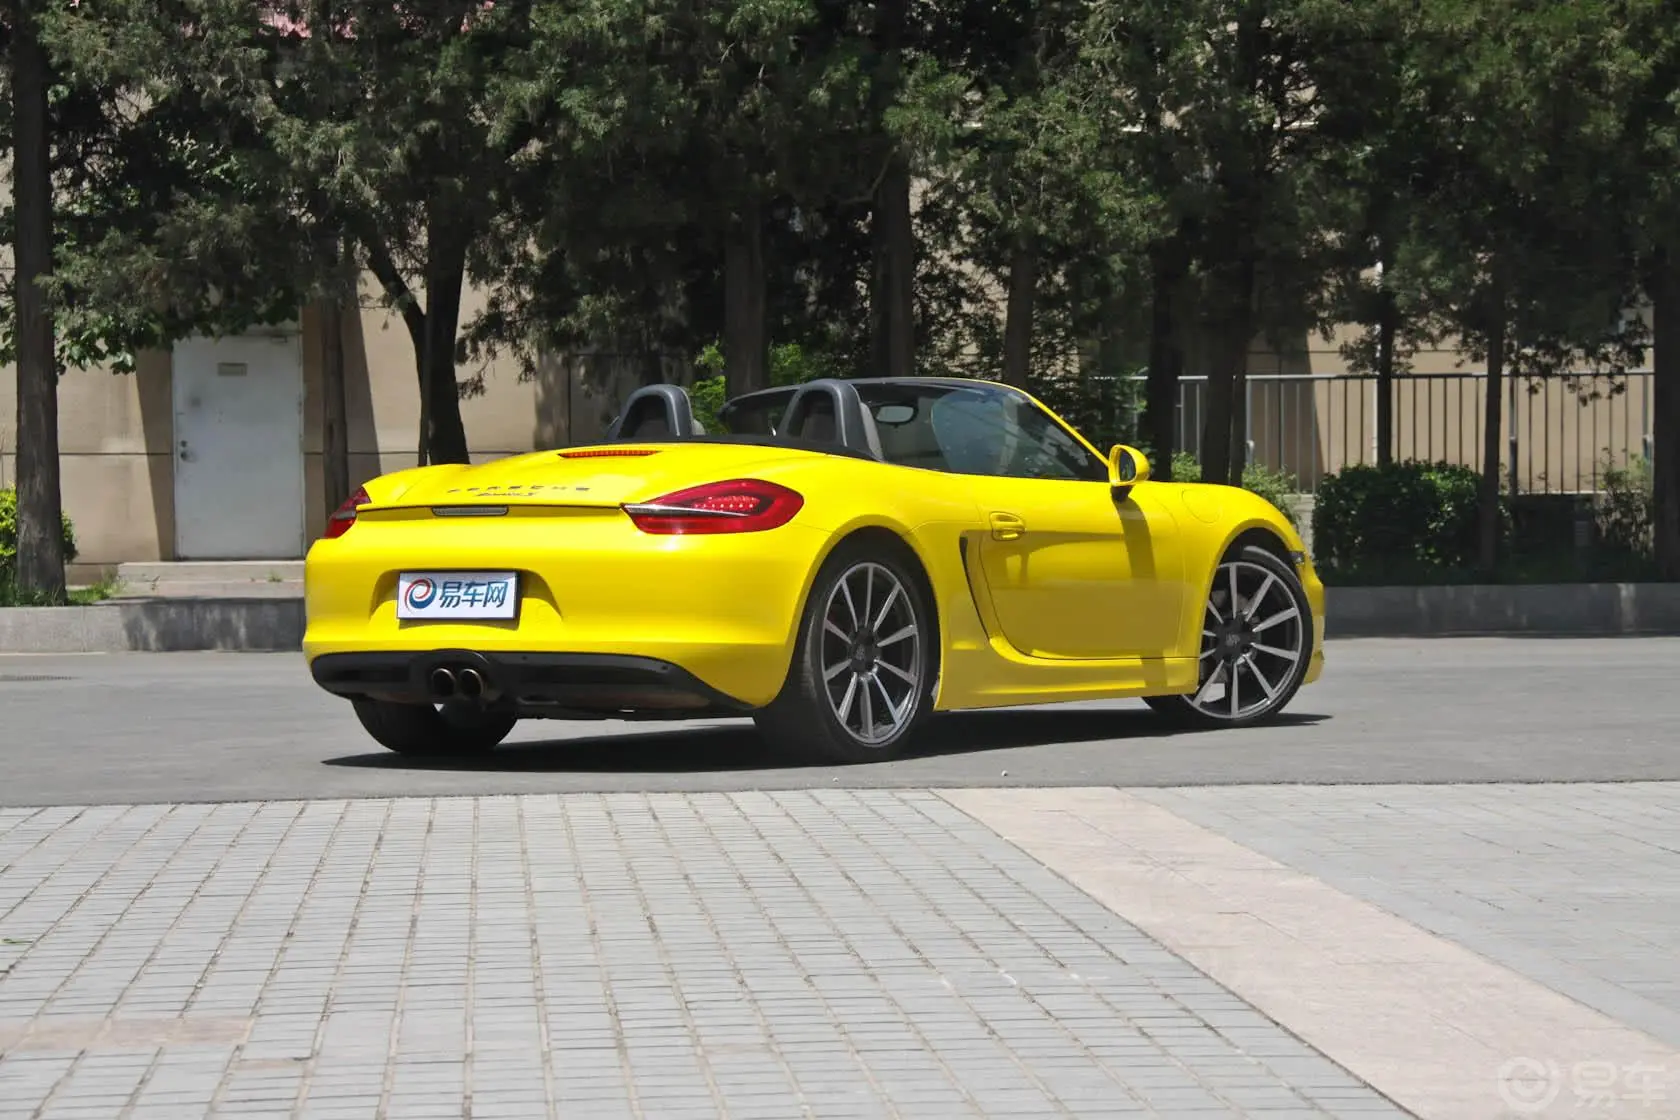 BoxsterBoxster S 3.4侧后45度车头向右水平